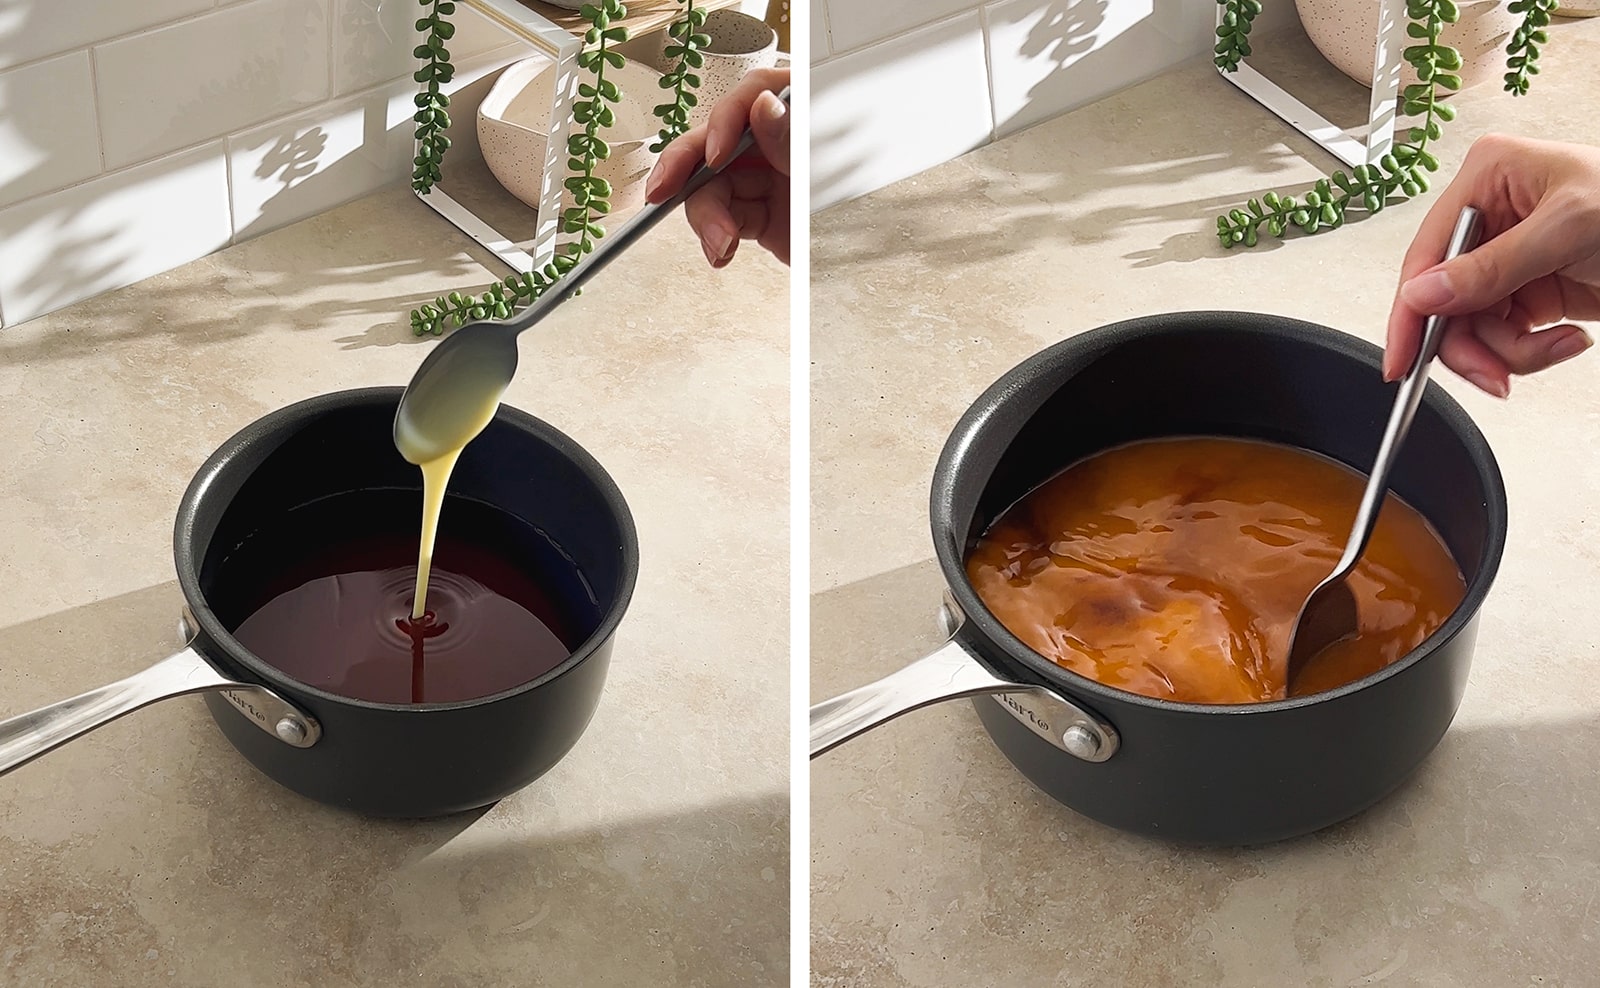 Left to right: adding condensed milk into Thai tea from spoon, hand stirring Thai tea with spoon.